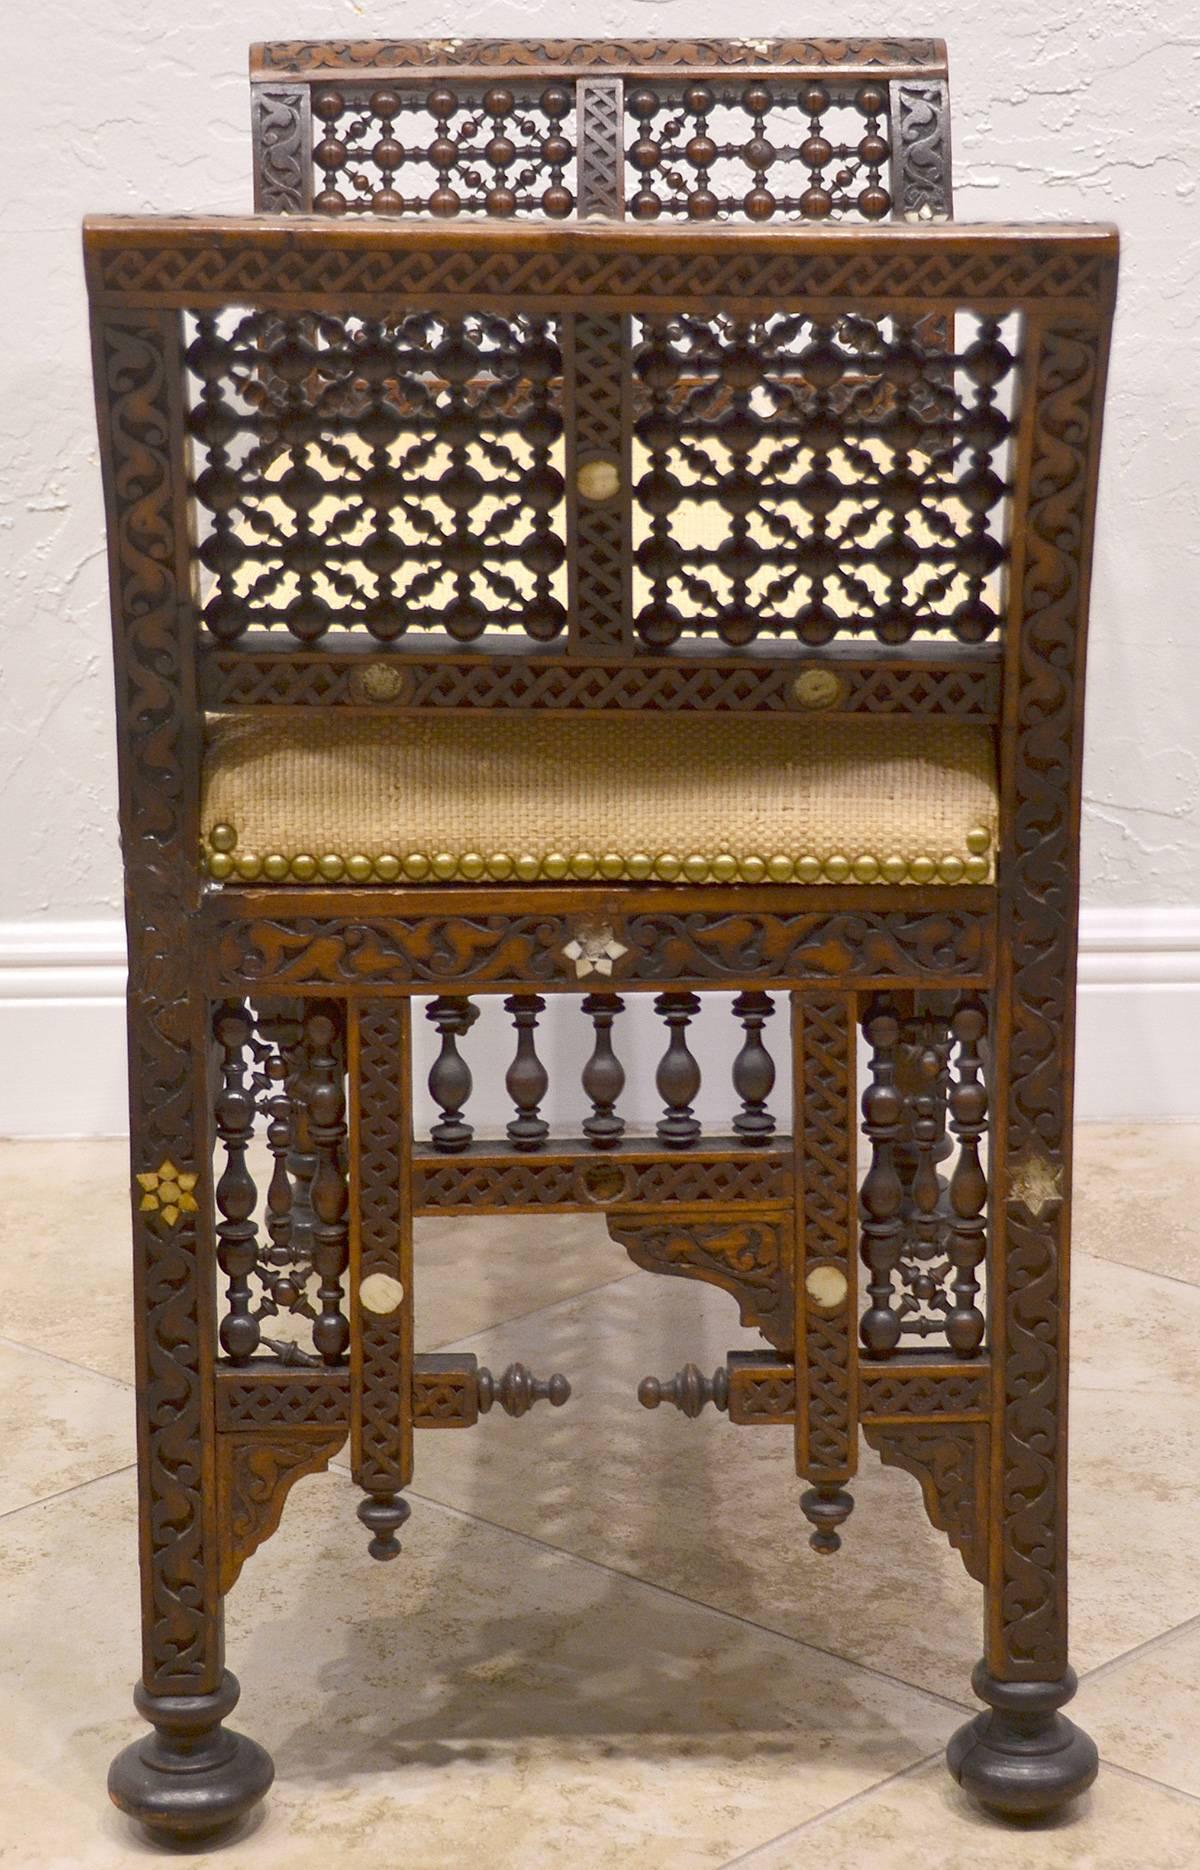 19th century Moroccan bench with mother-of-pearl and bone inlay, circa 1880s. Missing a couple bars. See photos.